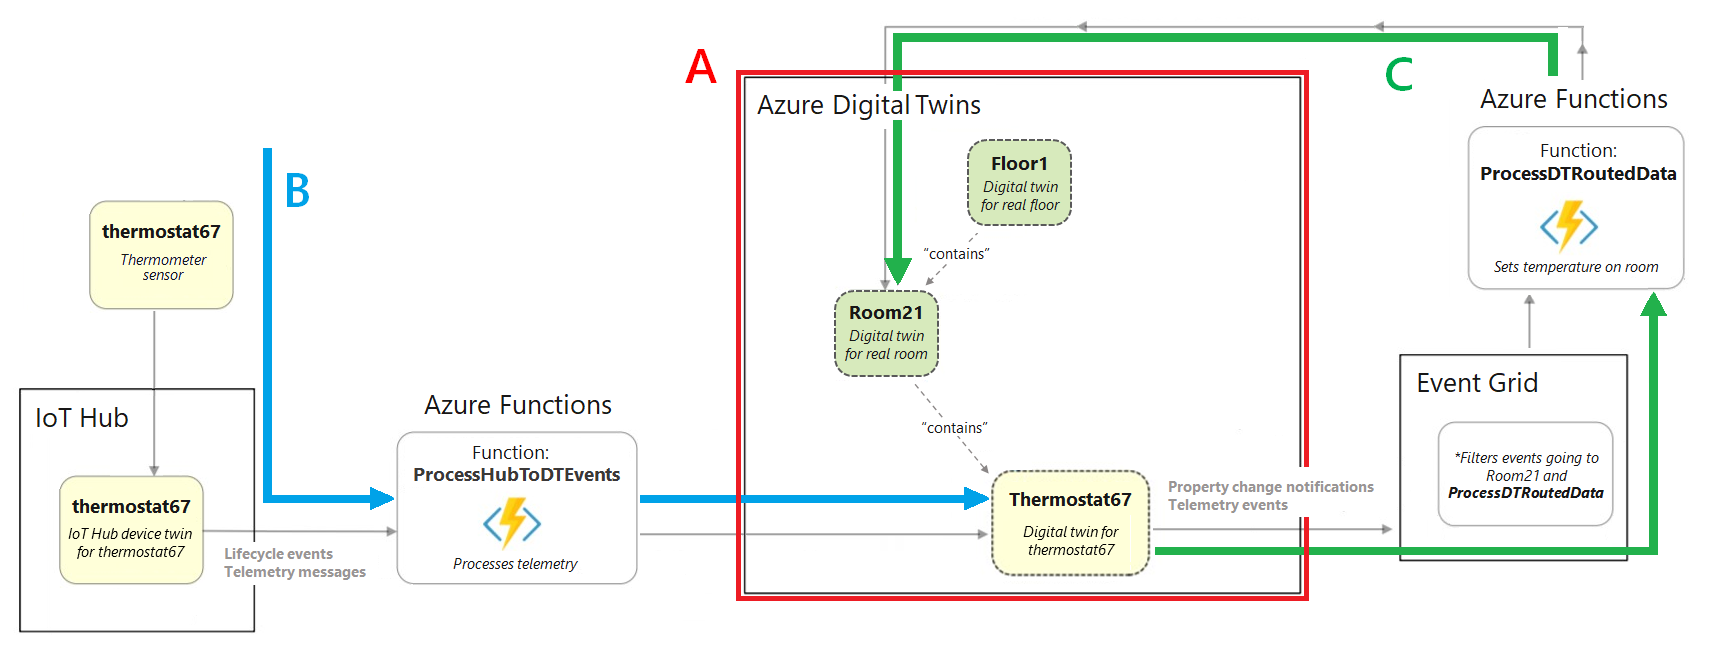 Diagram of the full building scenario, which shows the data flowing from a device into and out of Azure Digital Twins through various Azure services.